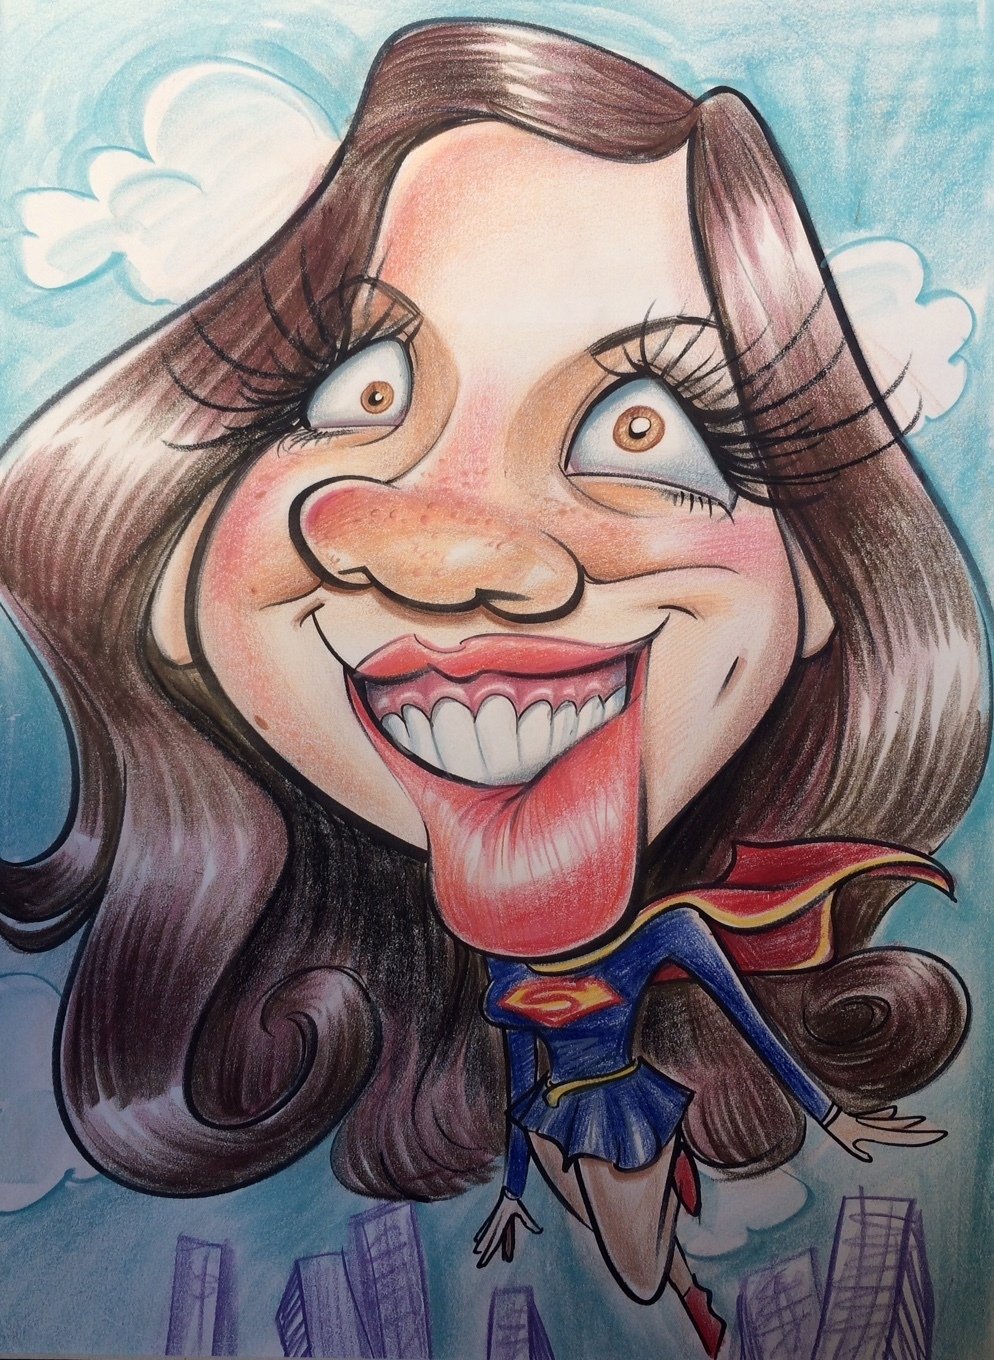 Nys Fair Caricature Artists Doodle Dramatically Different Takes On Woman Video Syracuse Com